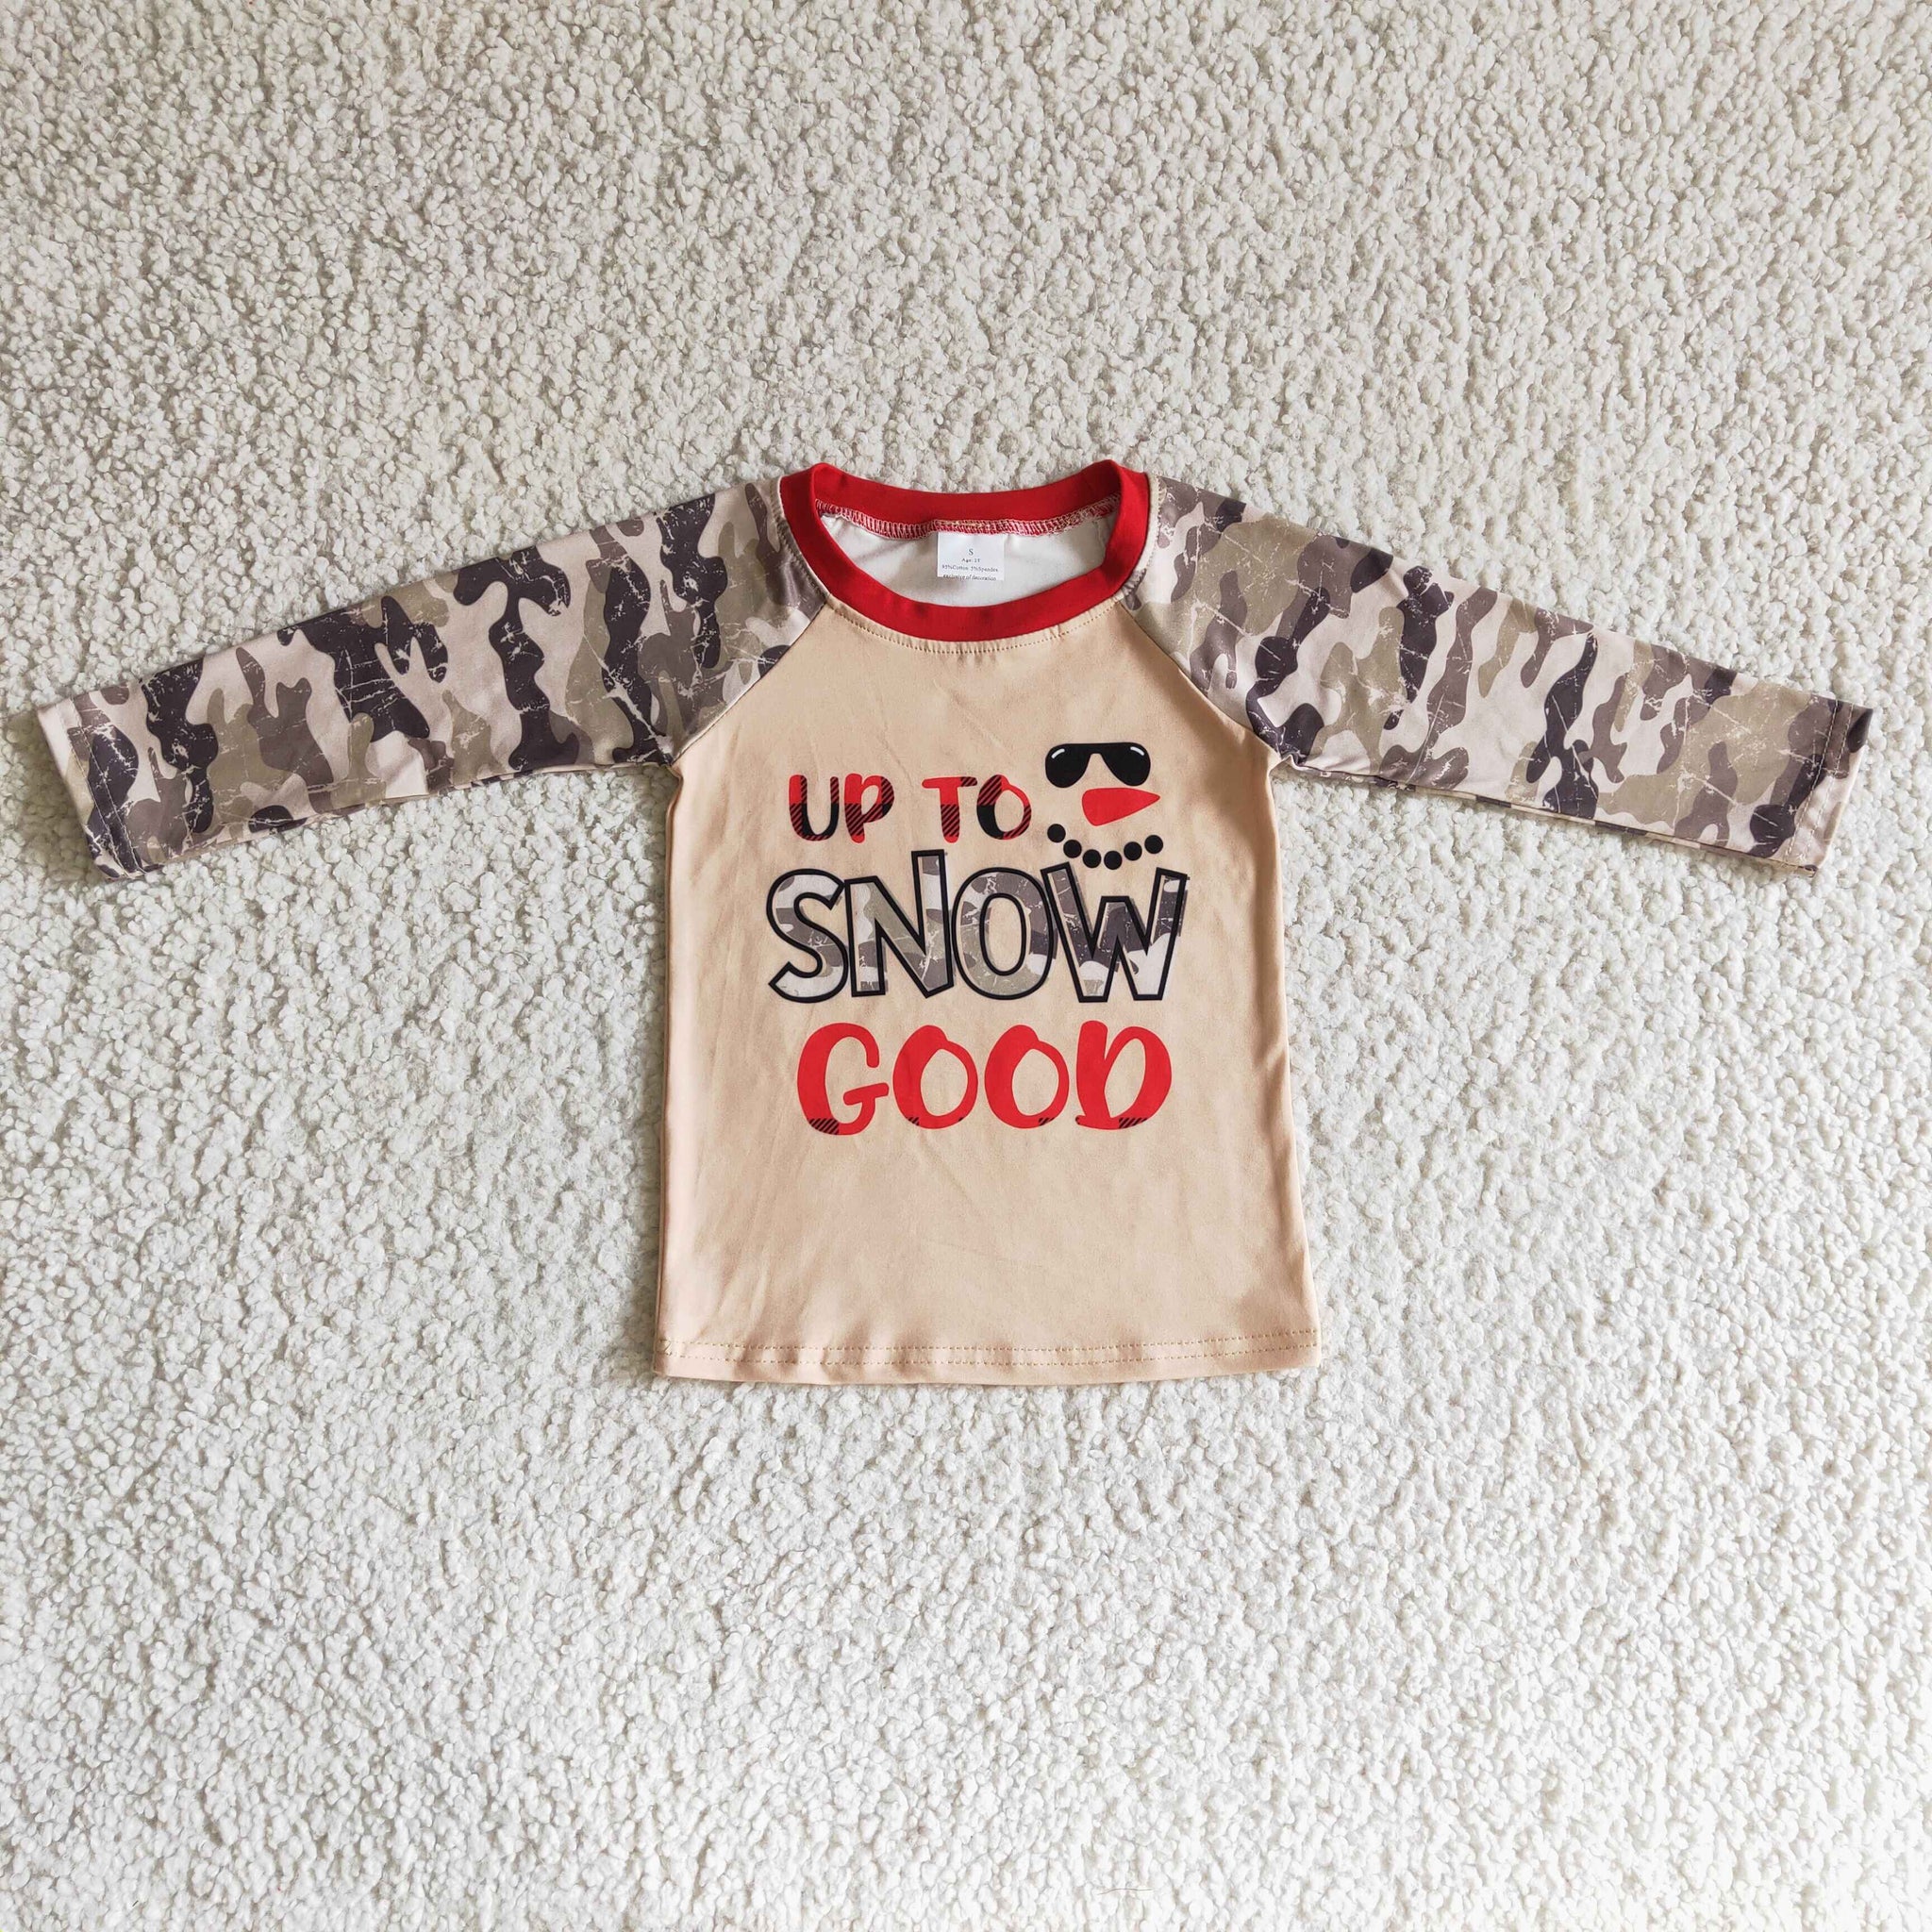 BT0097 baby boy clothes up to snow good winter shirt